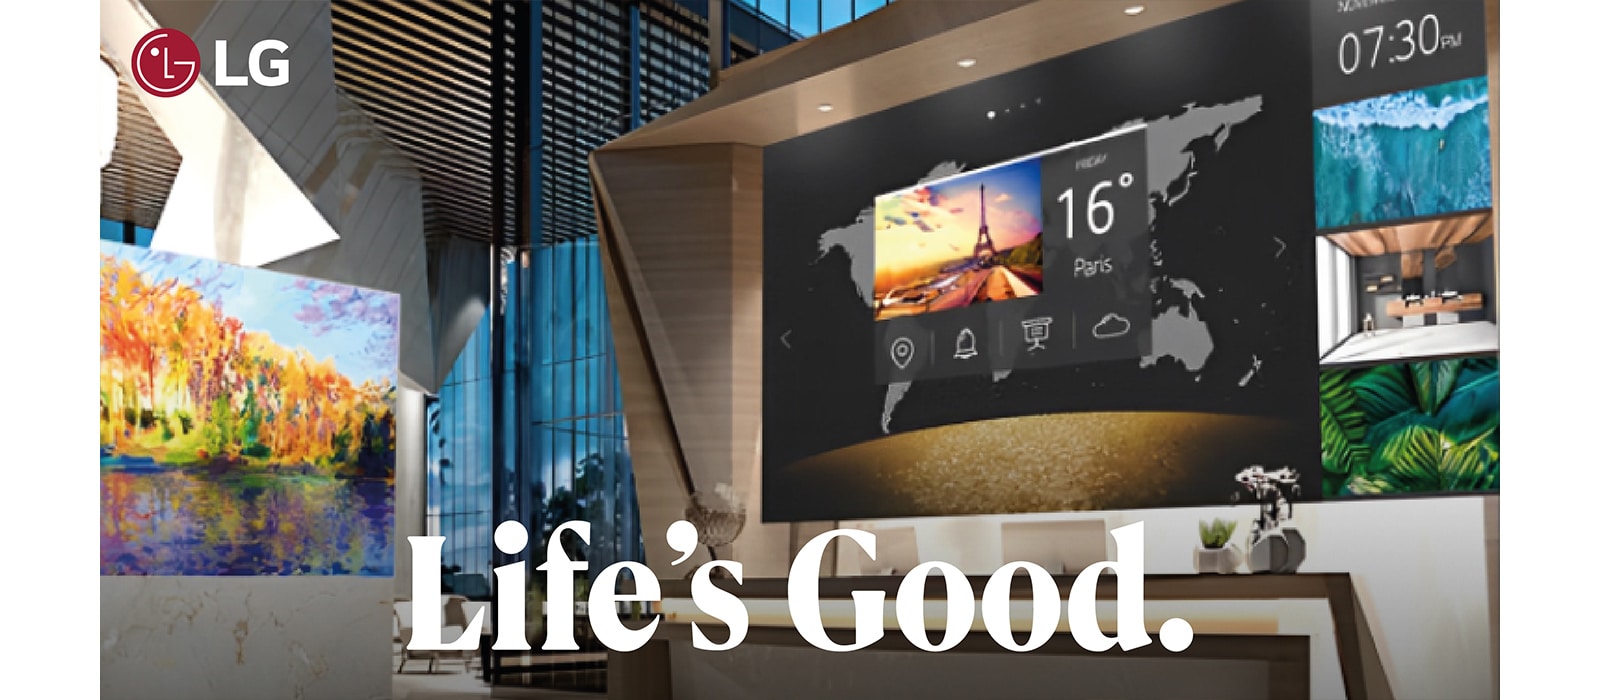 Building your Business Brand Image with LG Display Solutions